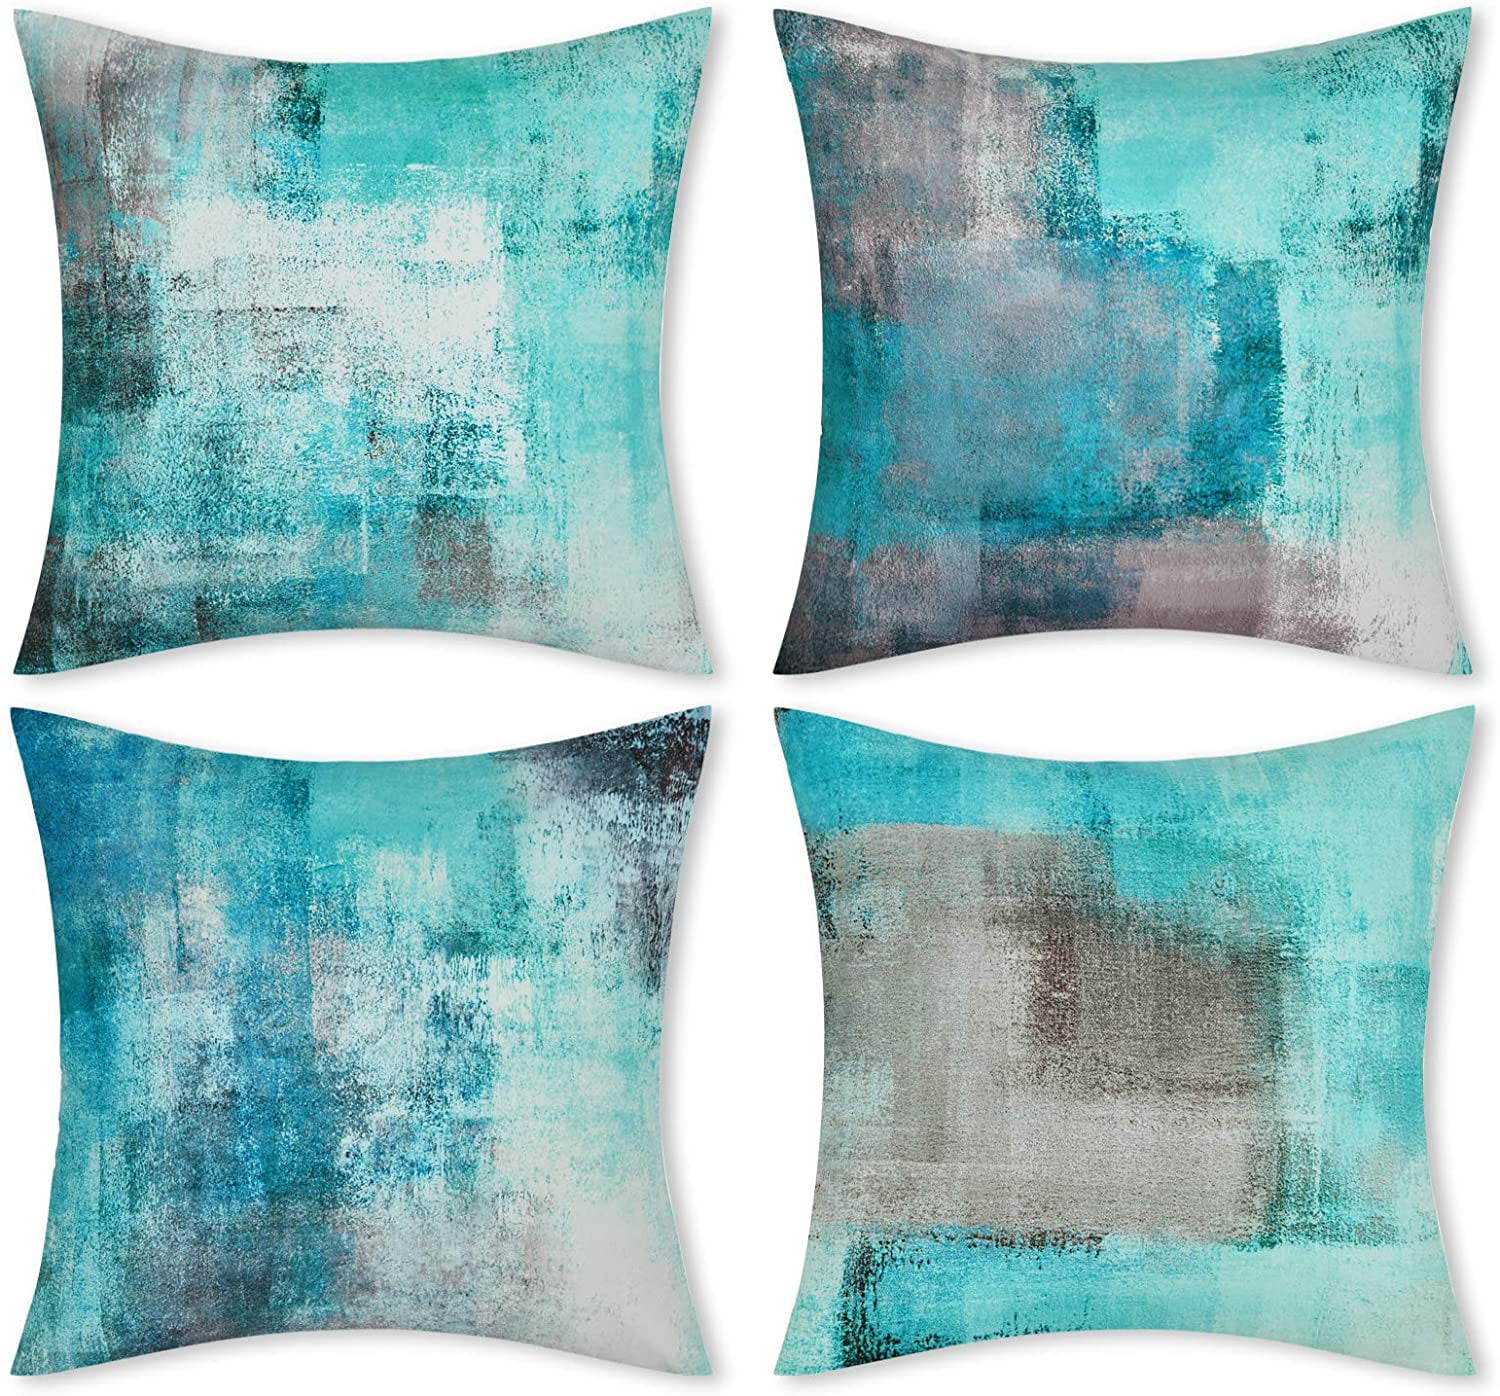 Geometric Pattern Cushion Covers Teal Blue Square Pillow Cases Decor 18x18 inch 